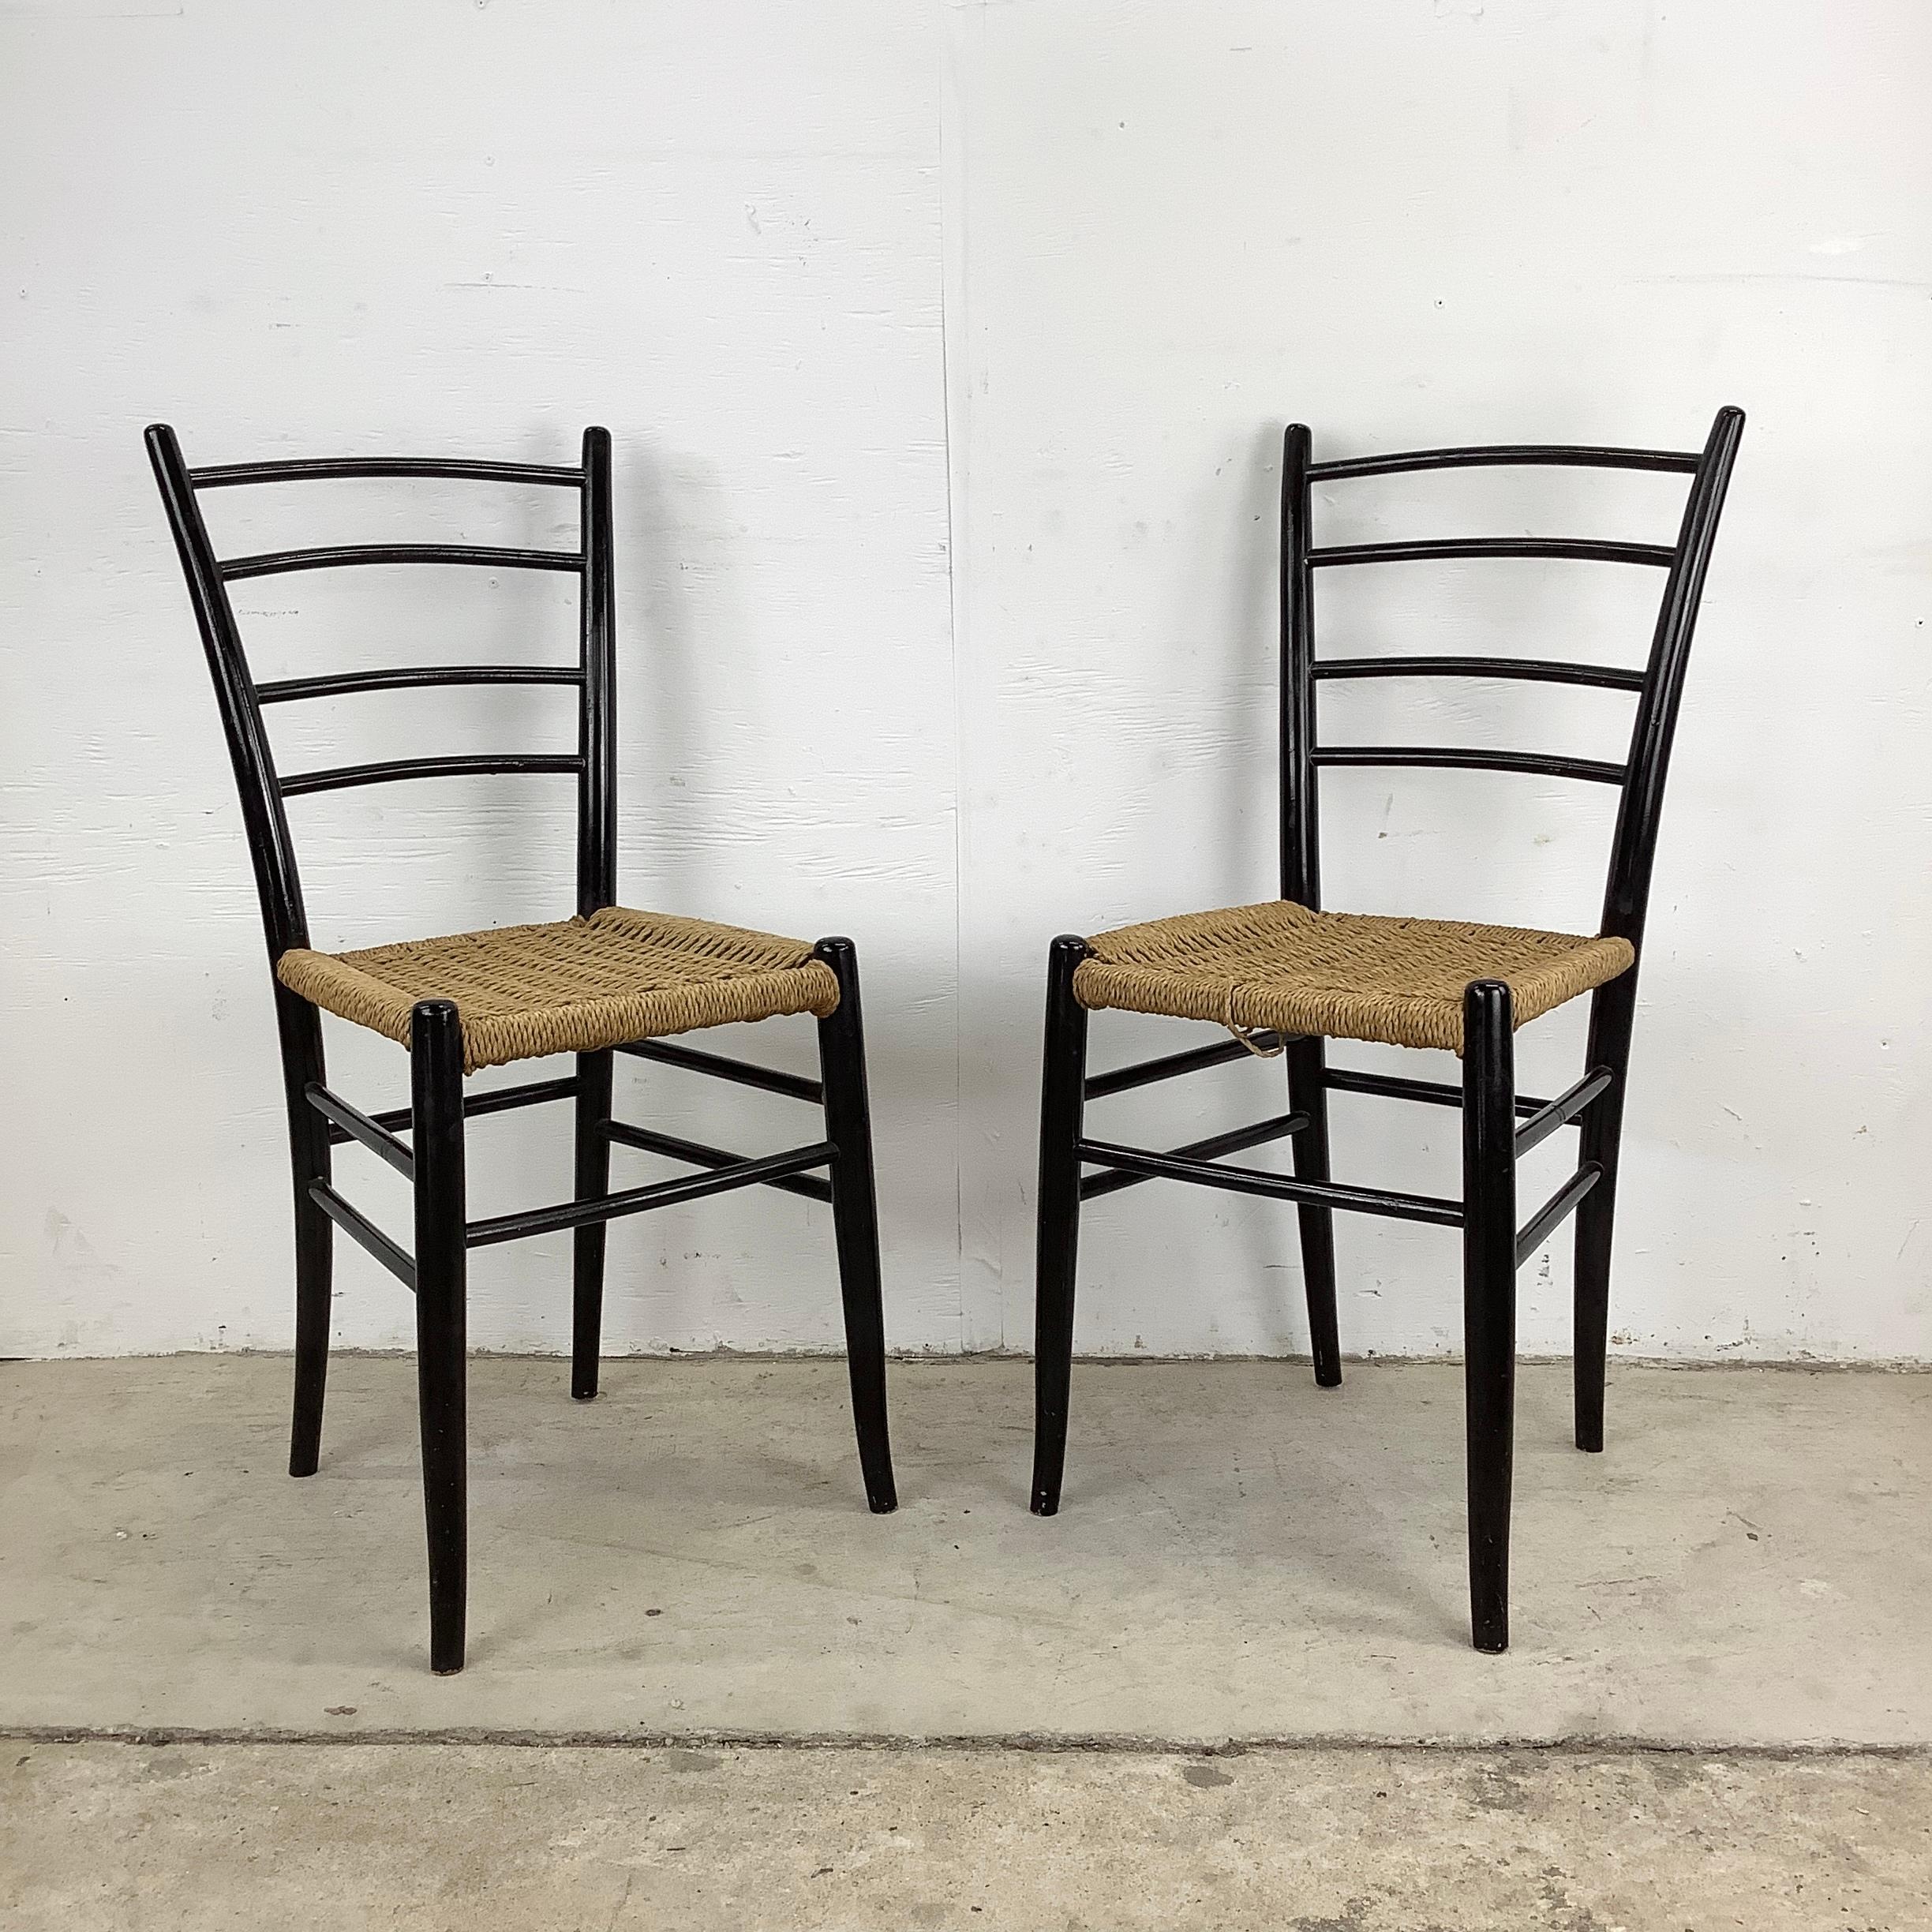 Revel in the allure of mid-century Italian craftsmanship with this set of four vintage rush seat dining chairs, a nod to the timeless designs of artists like Gio Ponti and Chiavari Spinetto. These petite vintage chairs, with their sleek lines and